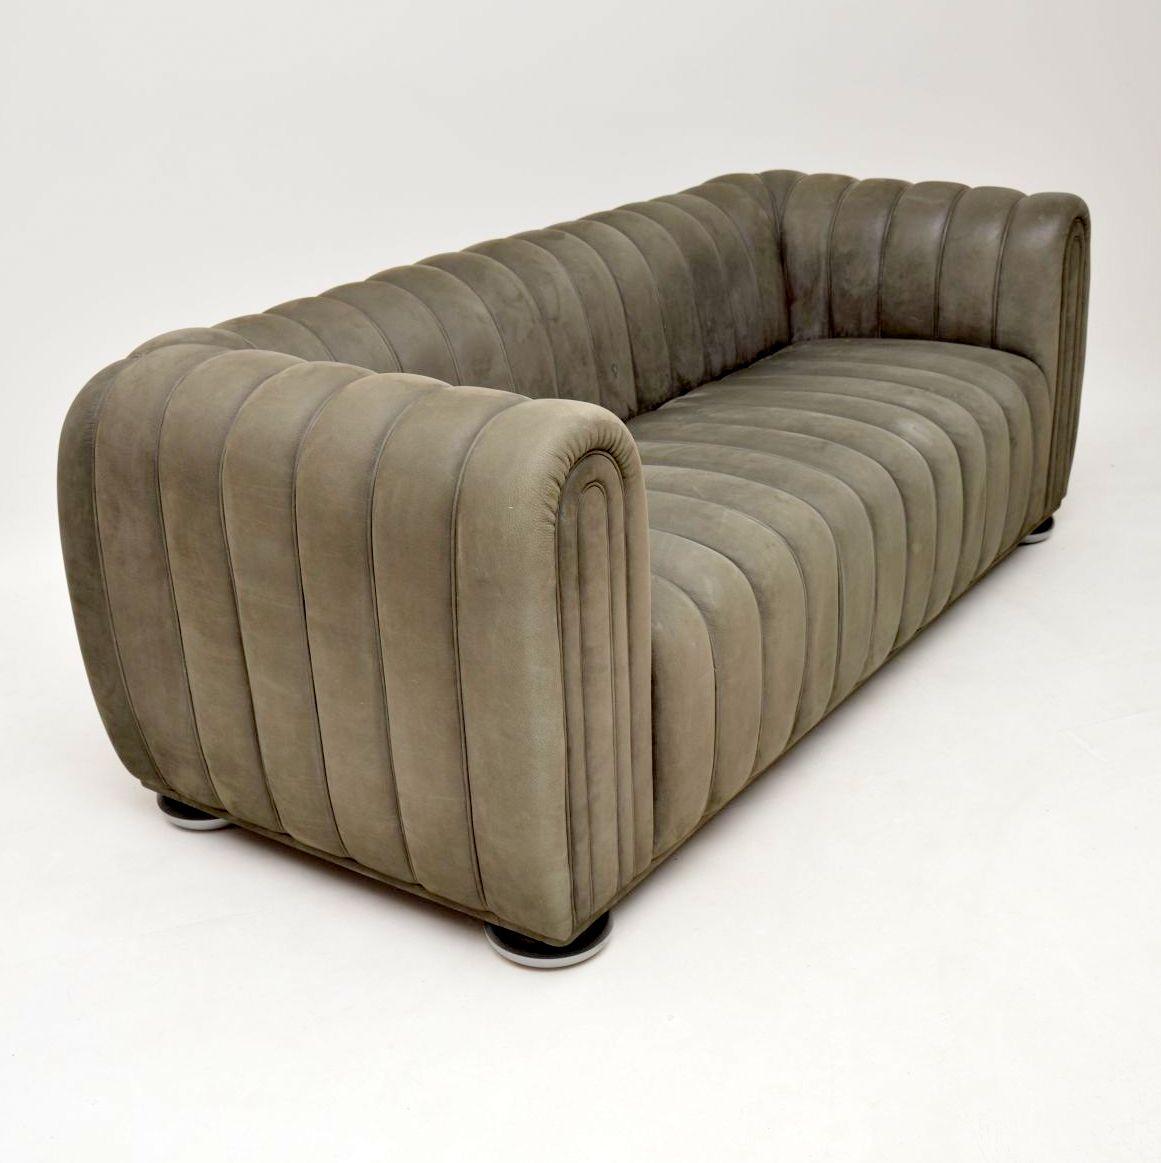 An absolutely stunning and iconic sofa, this was designed by Josef Hoffmann over 100 years ago, it’s called the 1910 club sofa. This was made in Austria by Wittmann in the late 20th century, it is of the highest quality you could possibly imagine.